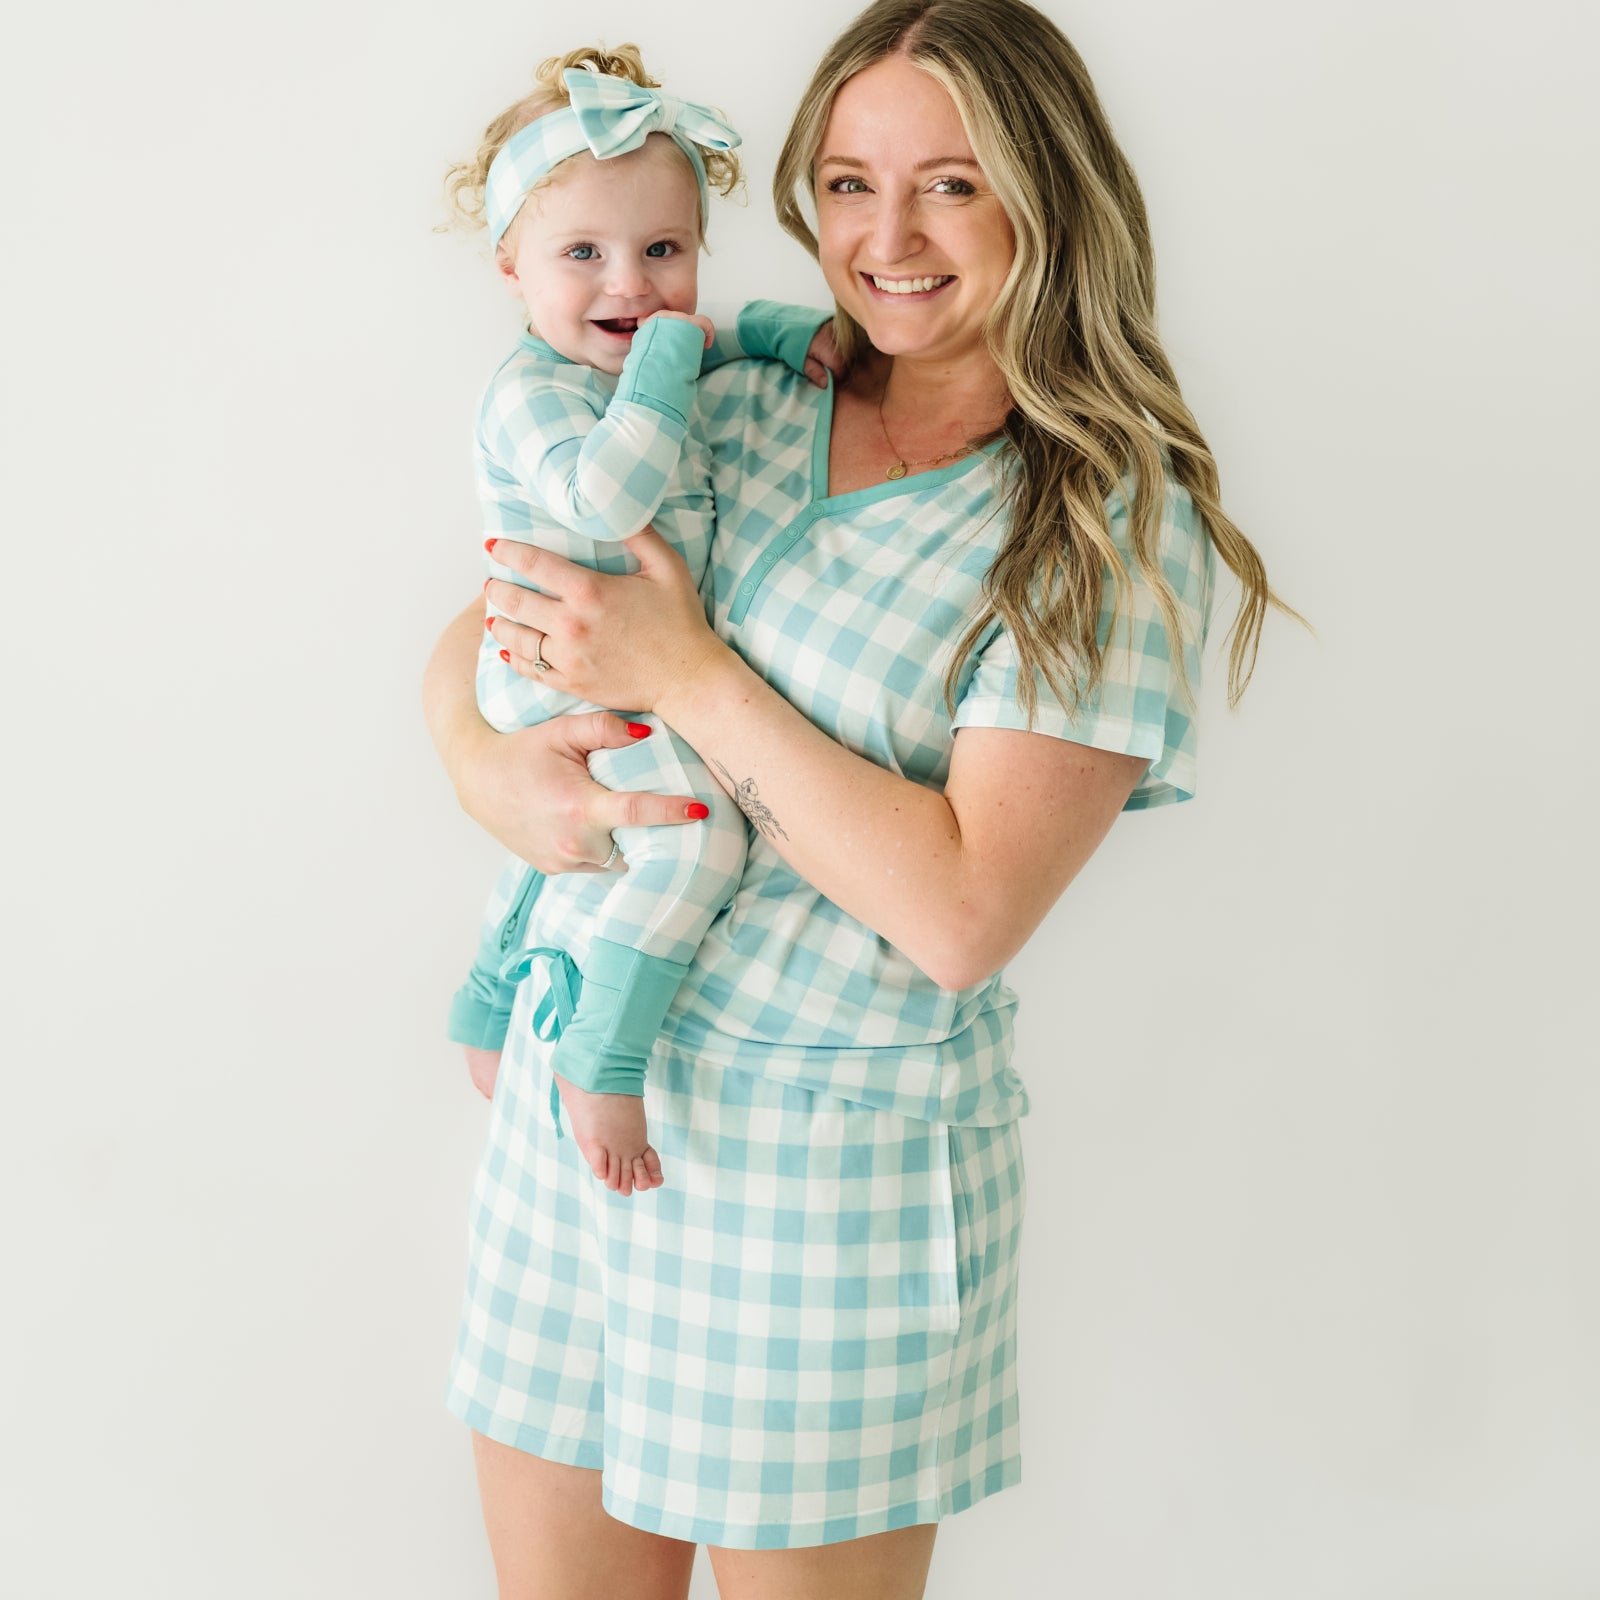 Woman holding her child wearing matching Aqua Gingham pajamas. Mom is wearing women's Aqua Gingham pajama shorts and matching women's short sleeve pajama top. Child is wearing a matching Aqua Gingham zippy paired with a matching luxe bow headband